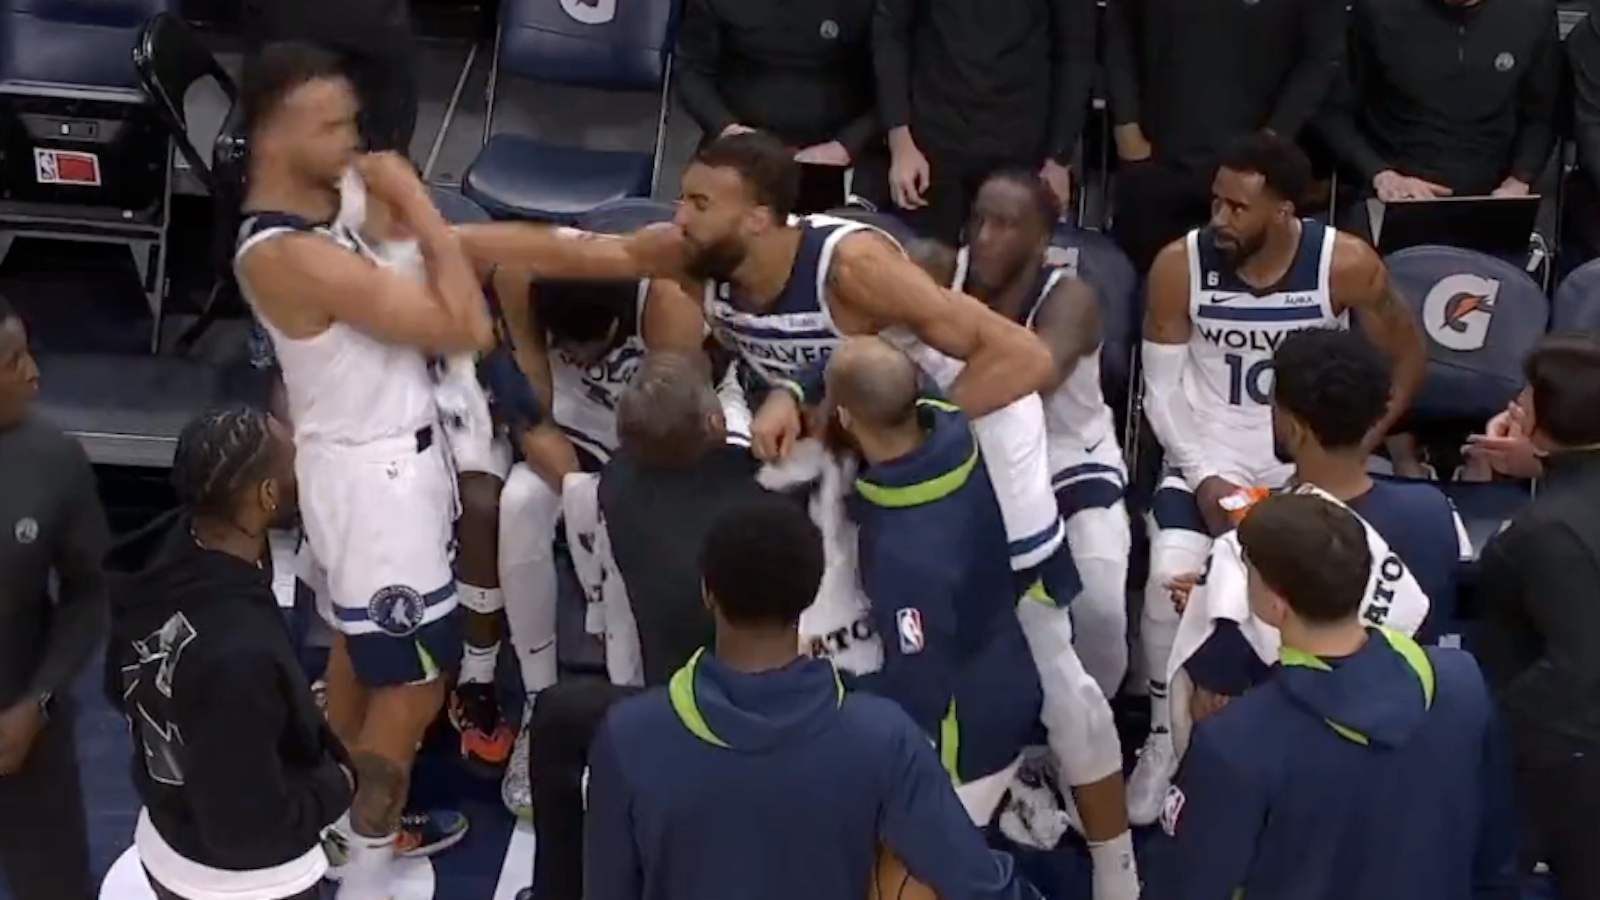 Rudy Gobert throws punch at teammate during heated altercation